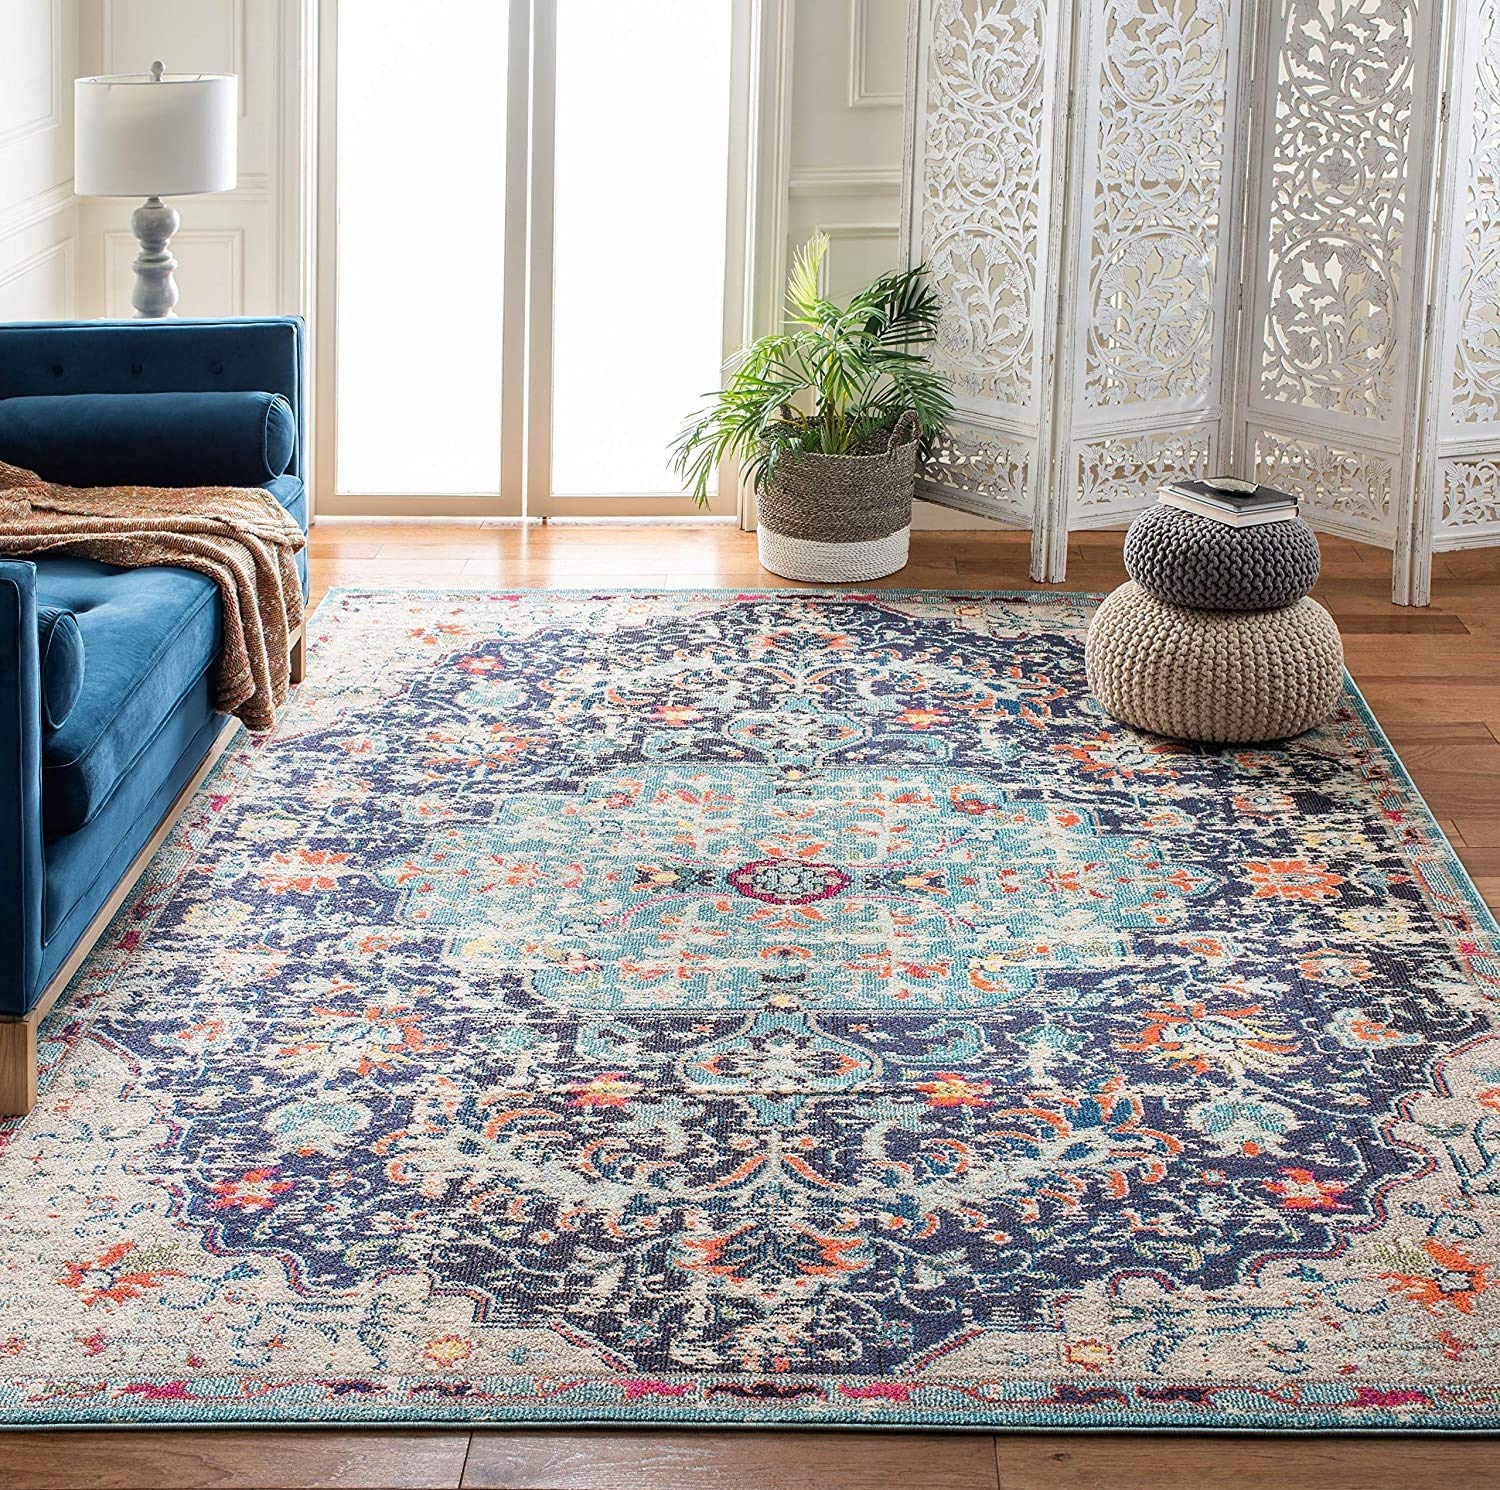 SAFAVIEH Madison Collection Area Rug - 5'3" x 7'6", Black & Teal, Boho Chic Medallion Distressed Design, Non-Shedding & Easy Care, Ideal for High Traffic Areas in Living Room, Bedroom (MAD447Z)